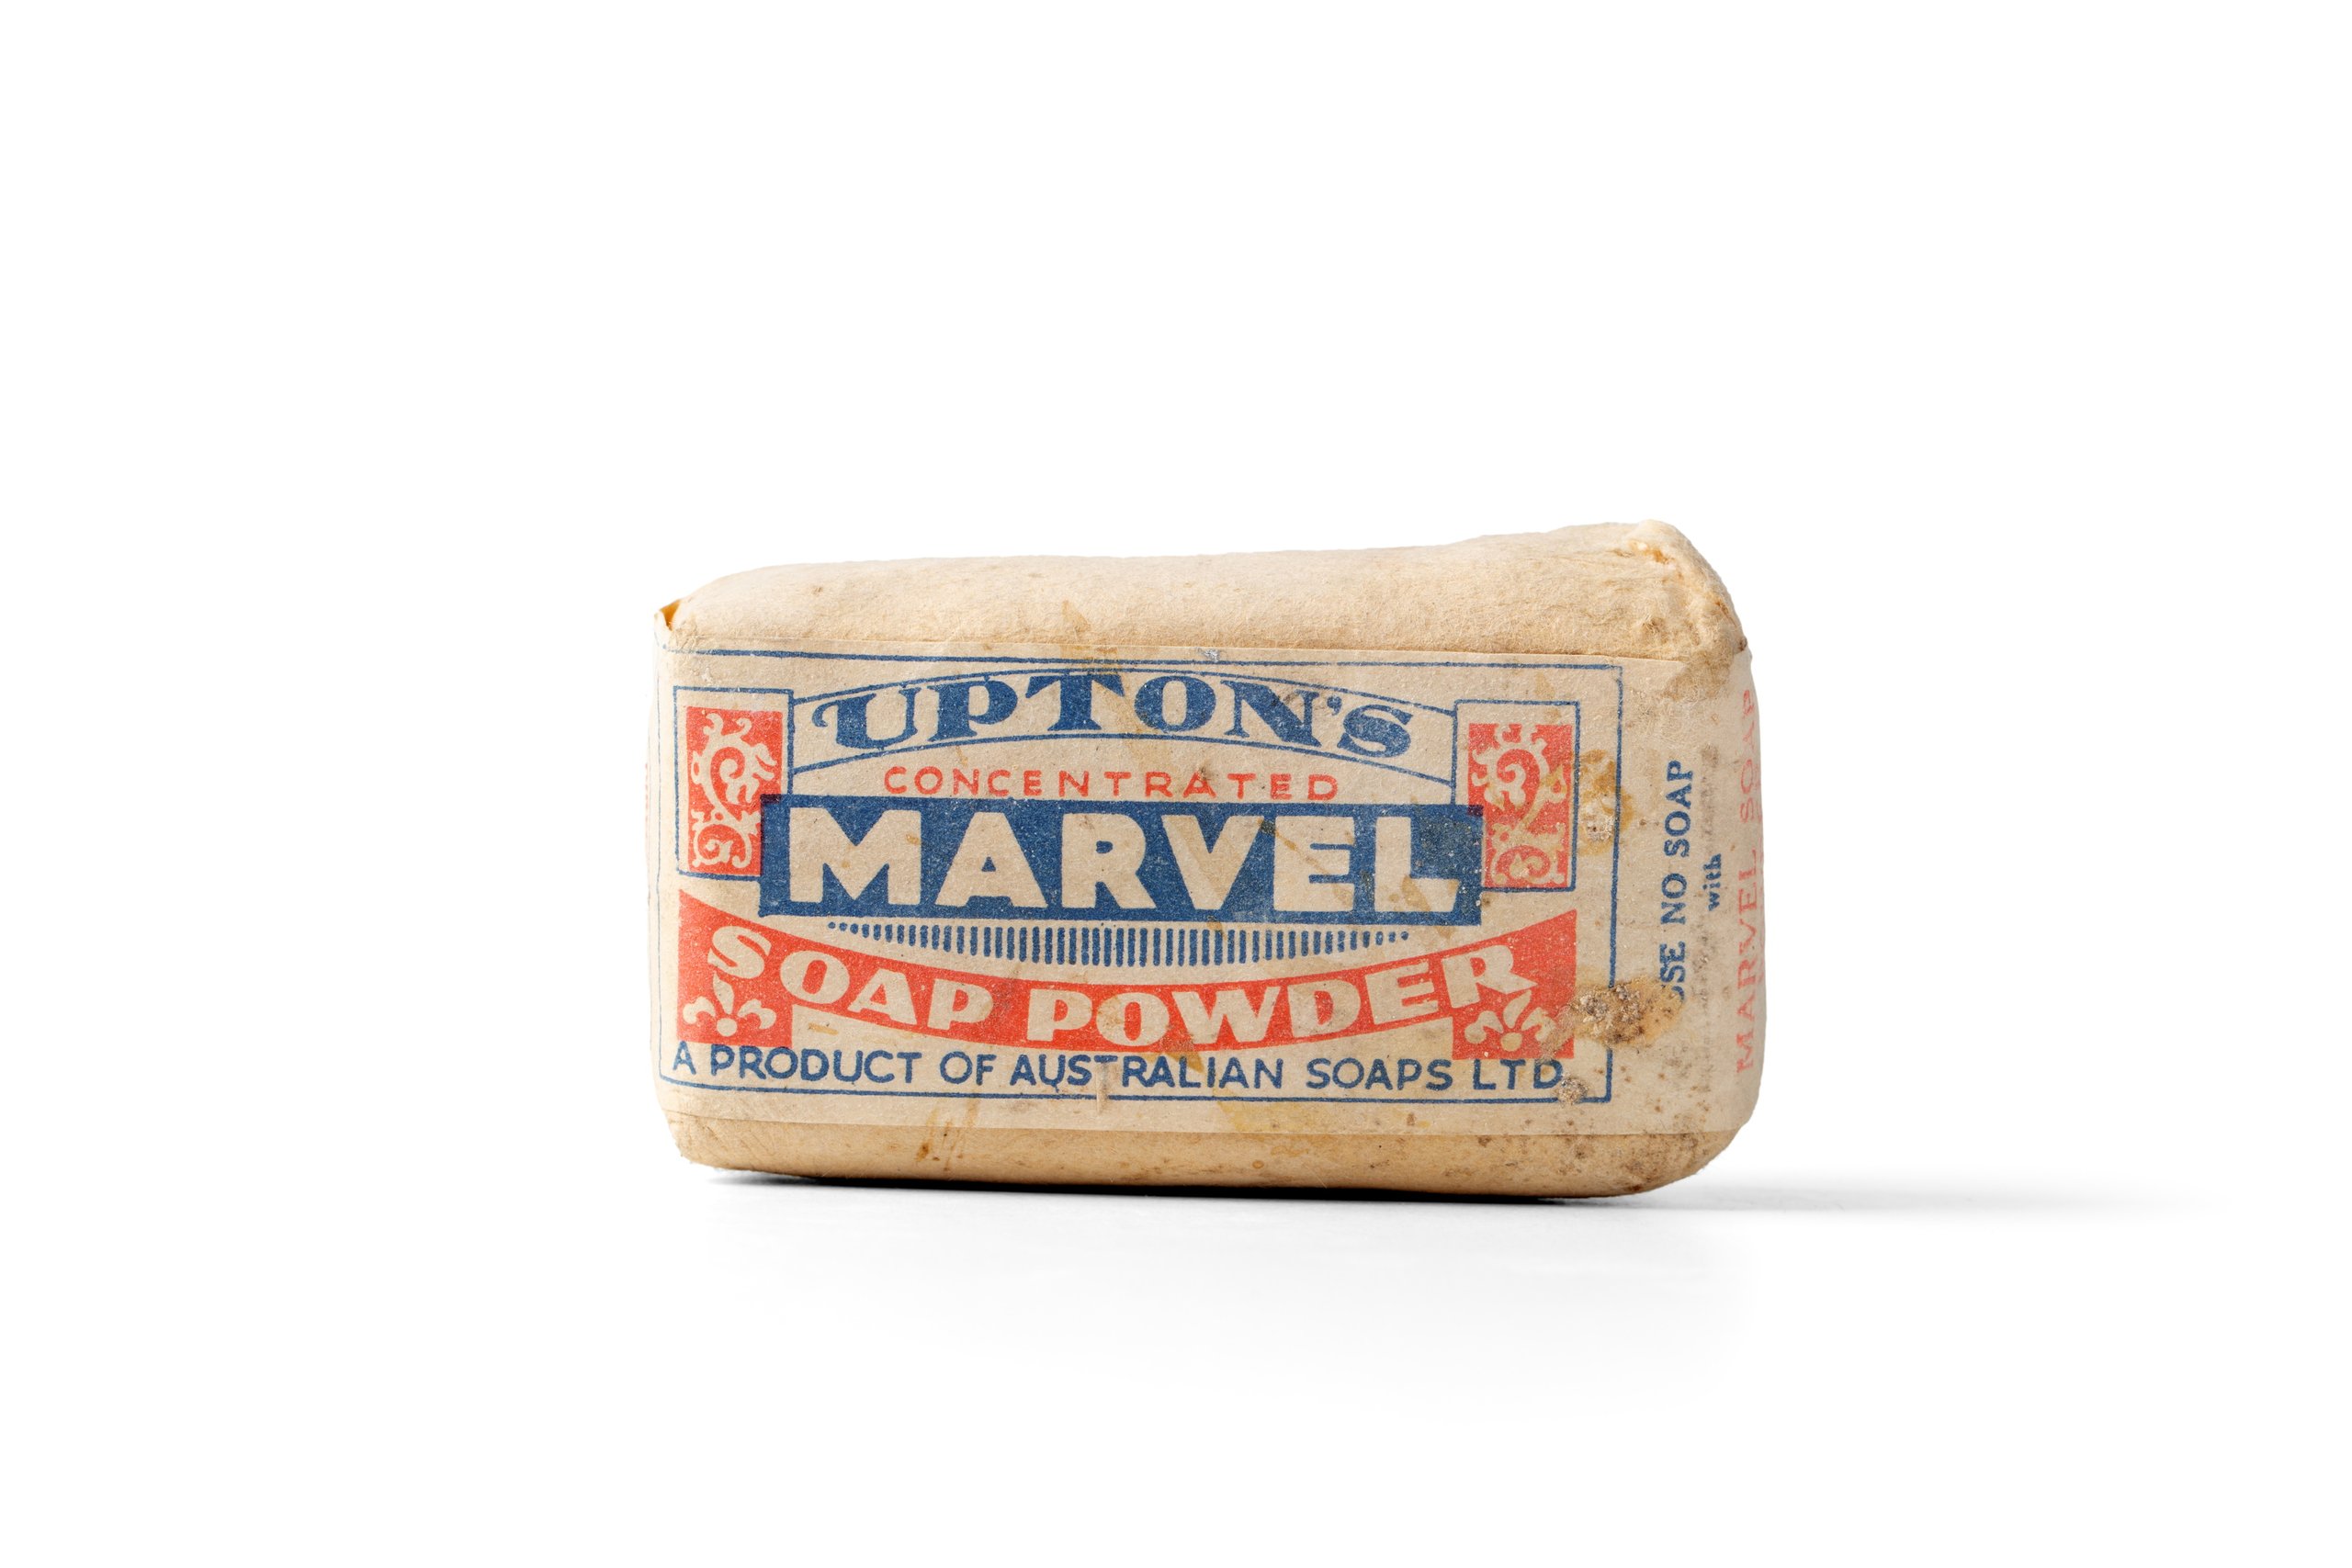 Powerhouse Collection - 'Uptons Concentrated Marvel Soap Powder' packet by  Australian Soaps Ltd